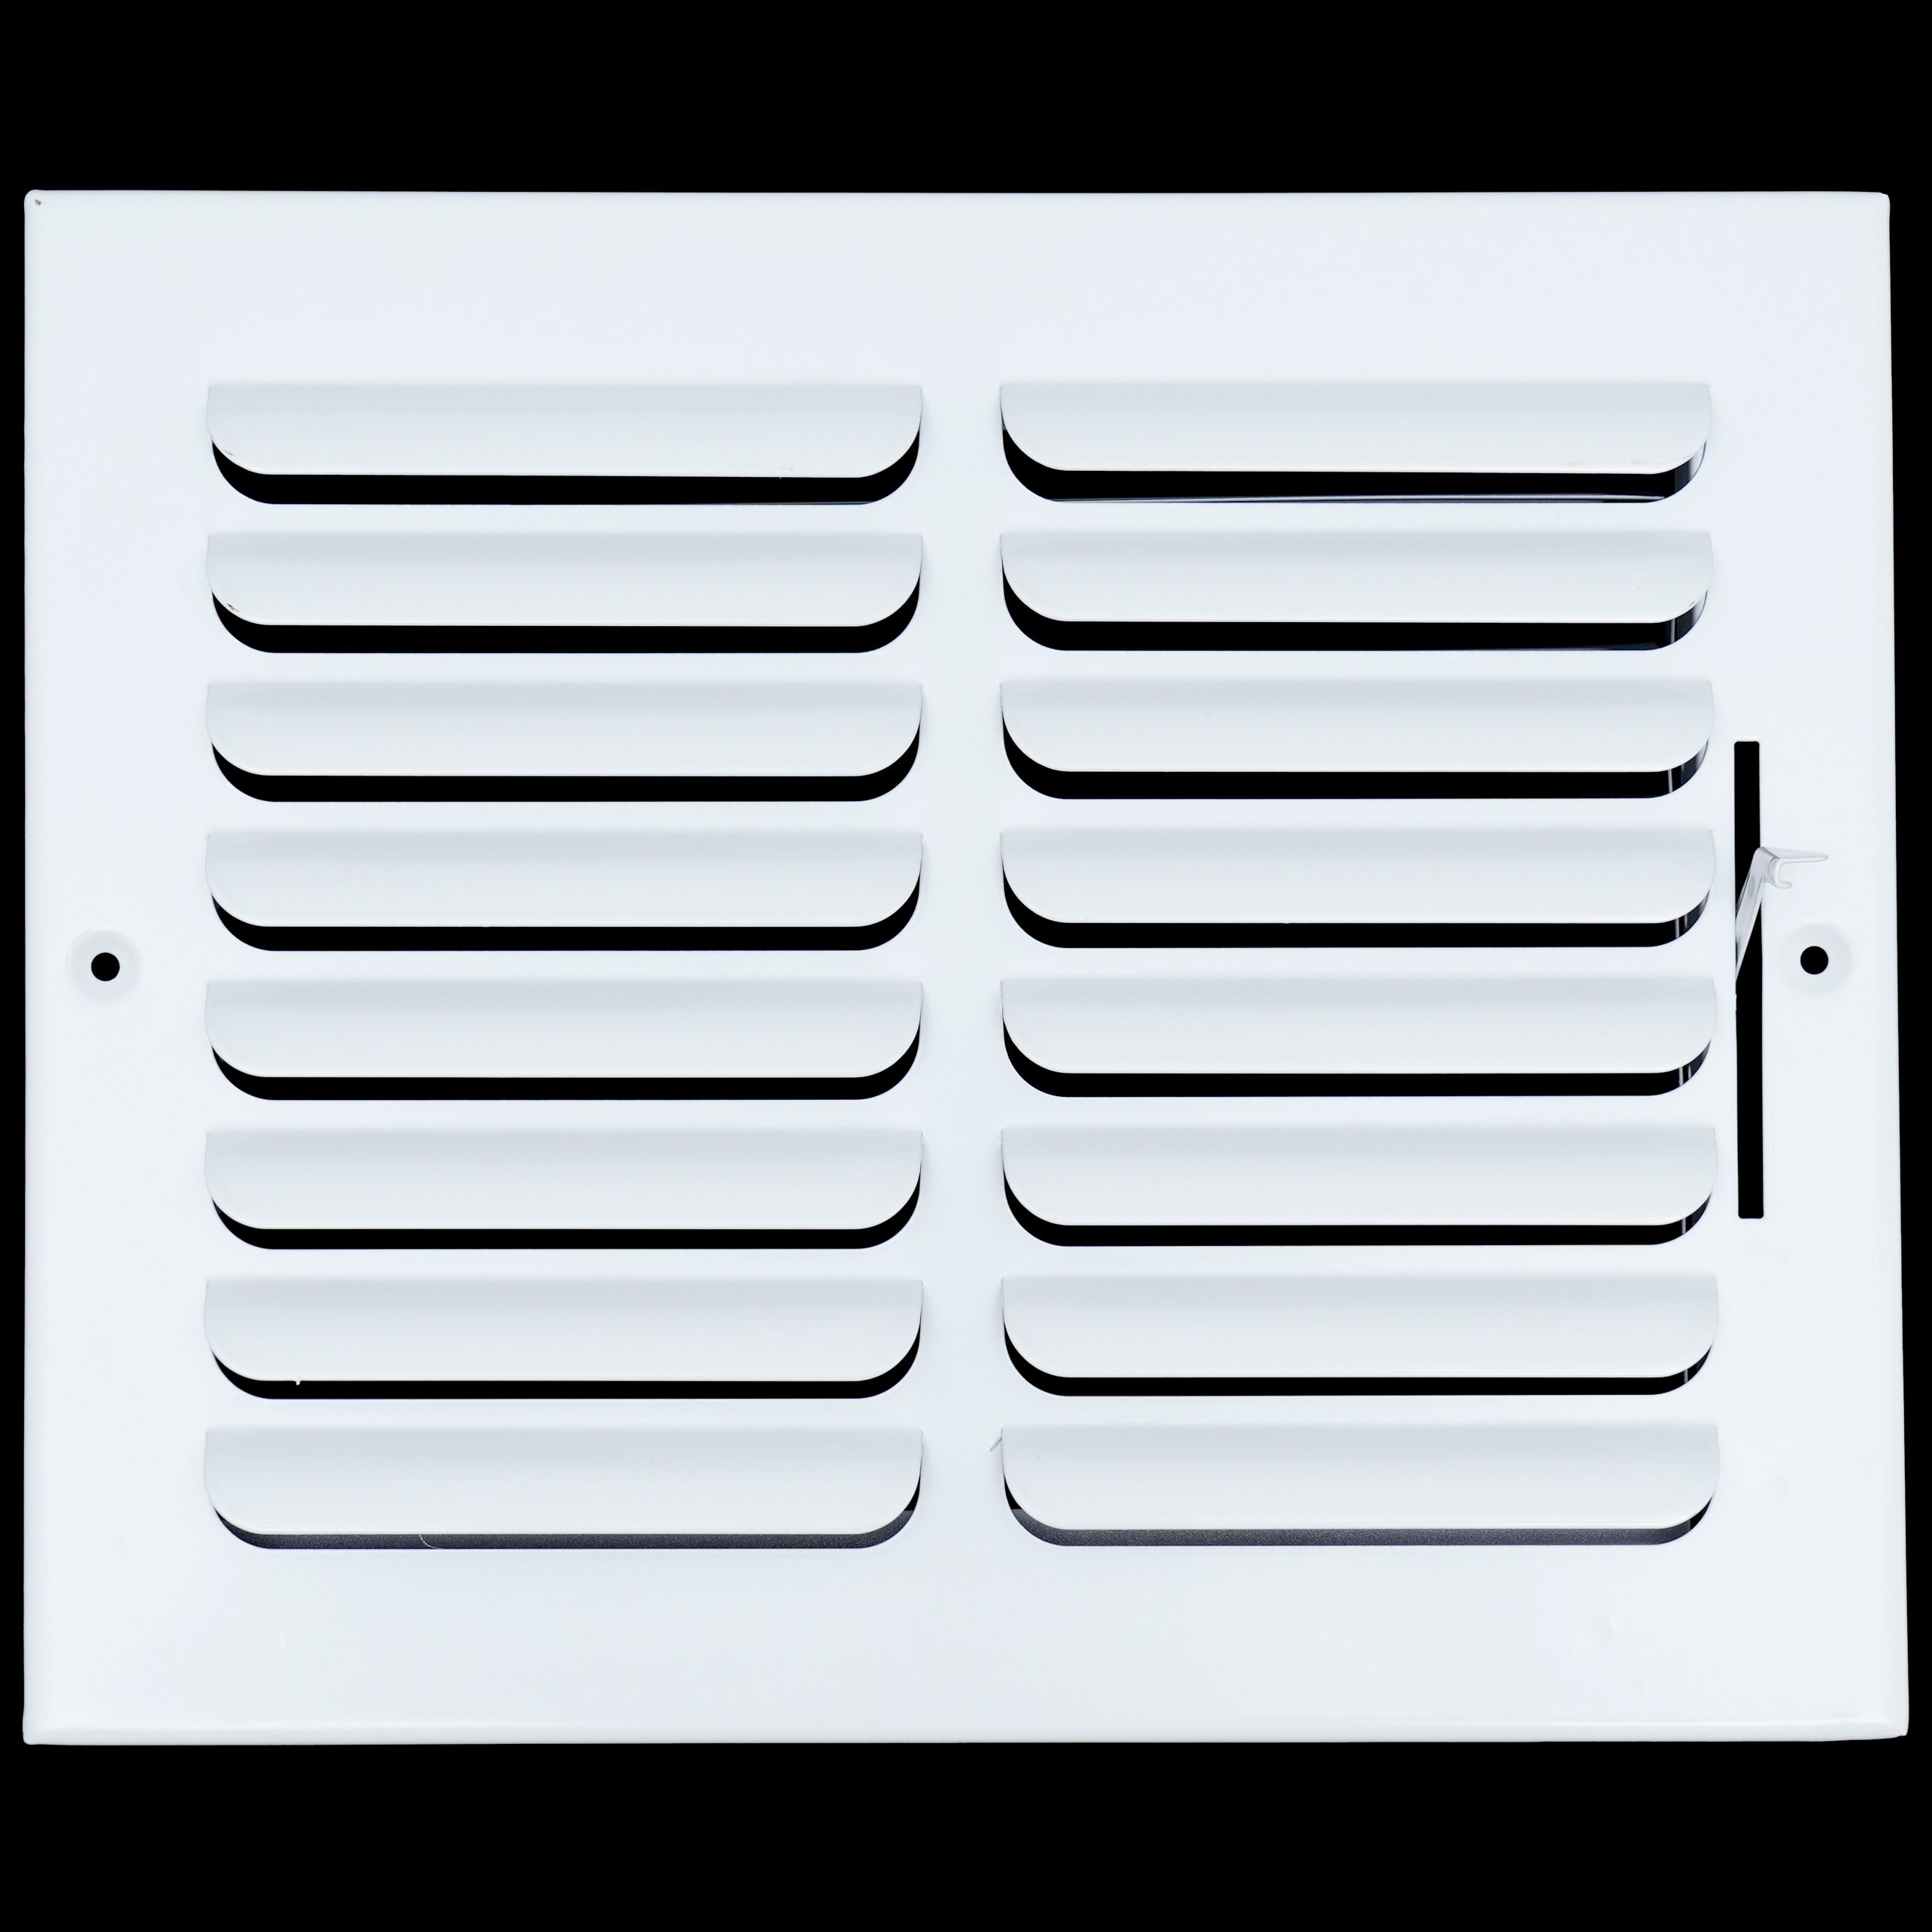 airgrilles 10"w x 8"h 1 way fixed curved blade air supply diffuser  -  register vent cover grill for sidewall and ceiling  -  white  -  outer dimensions: 11.75"w x 9.75"h hnd-cb-wh-1way-10x8  - 1